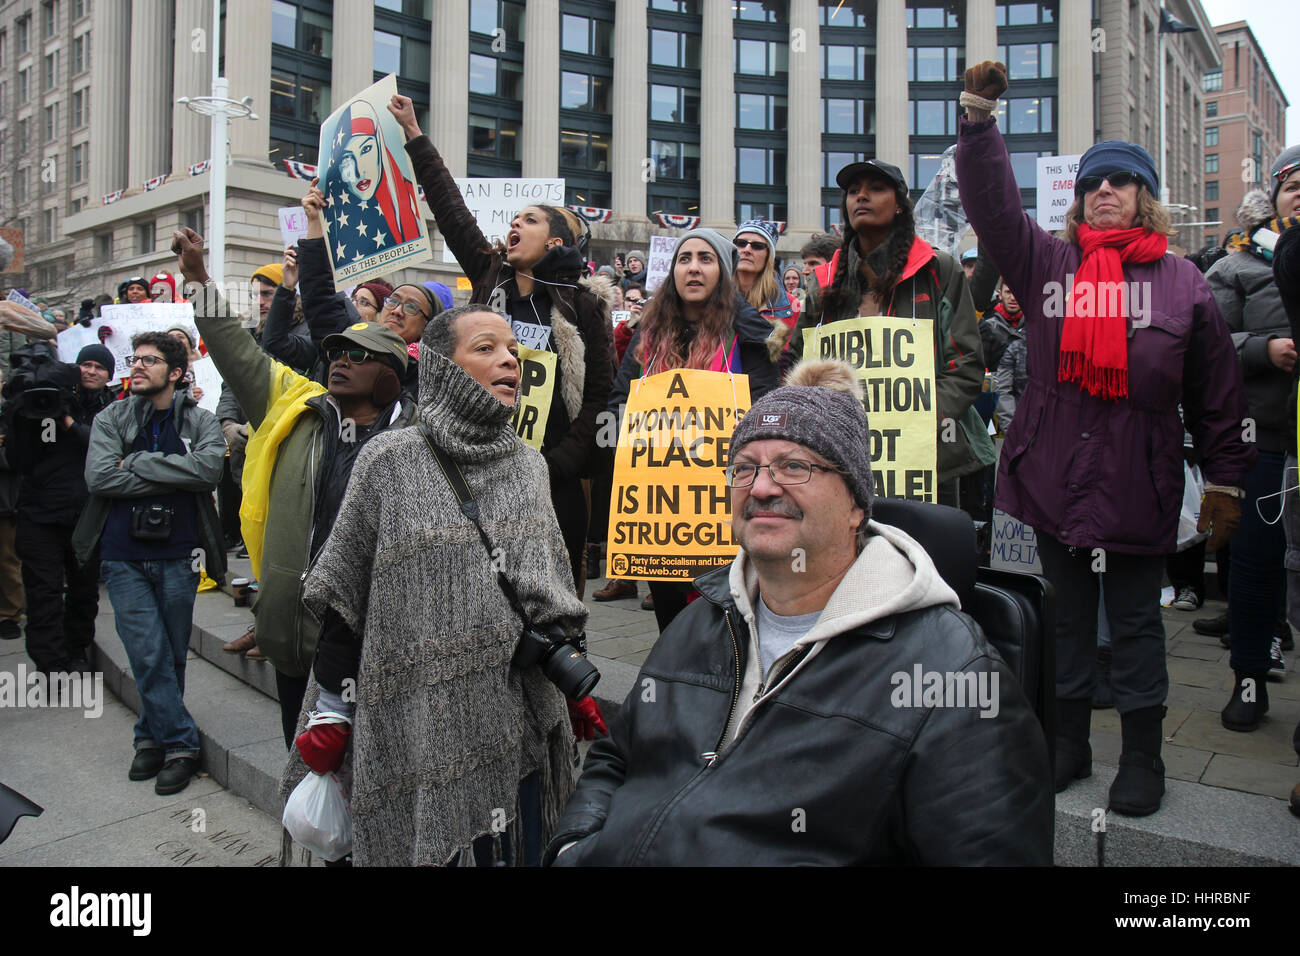 Washington, USA. 20th January, 2017. Protesters at a rally held by the ANSWER Coalition on the day of the inauguration of Donald J Trump as President of the United States. Credit: Susan Pease/Alamy Live News Stock Photo